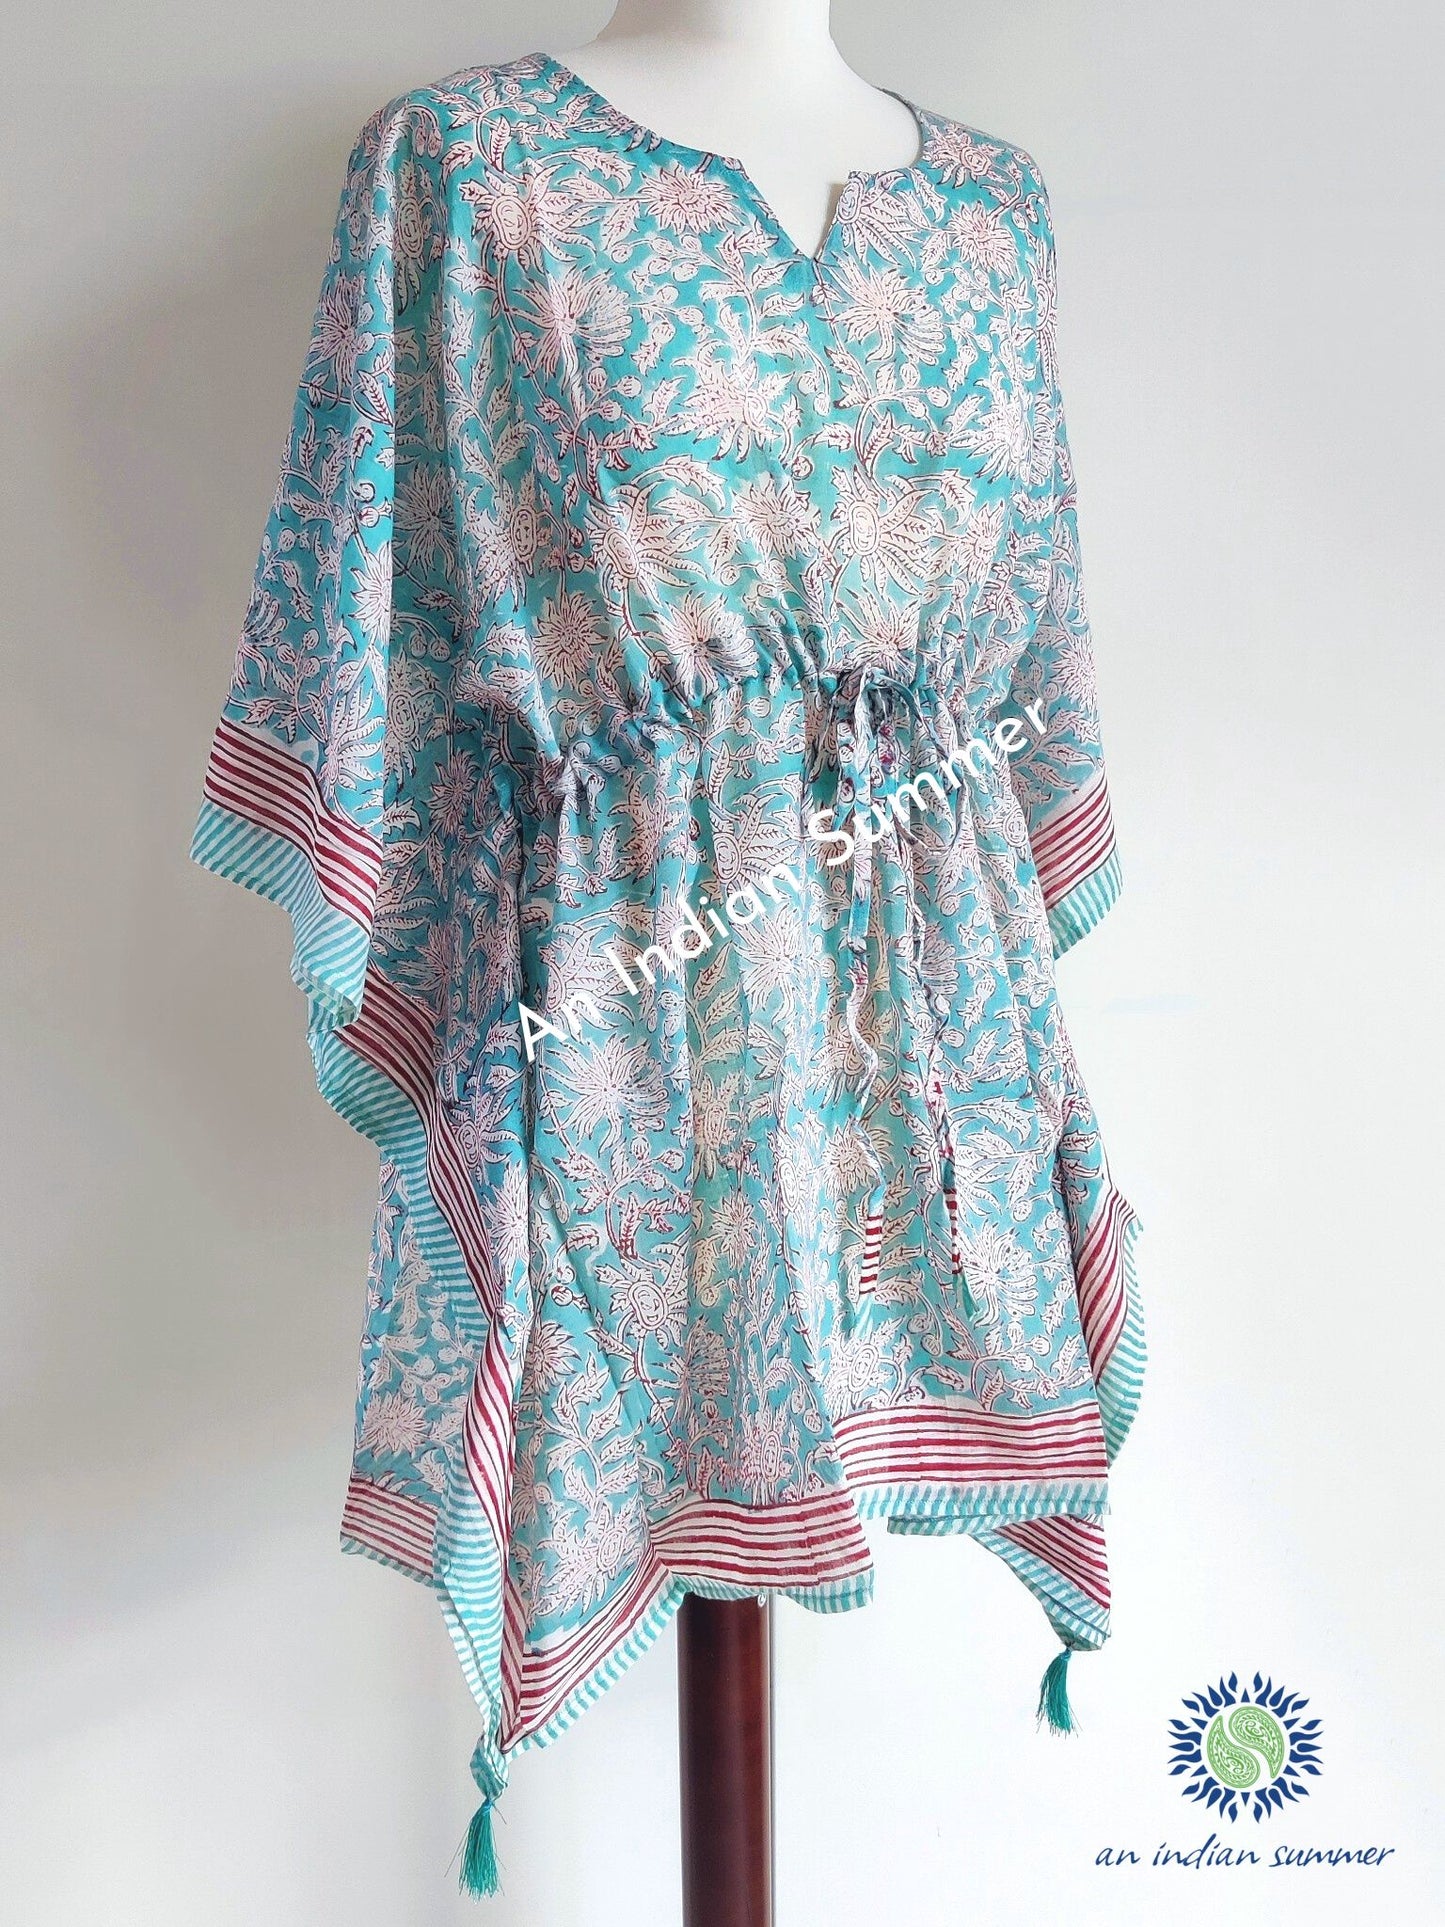 Maya Poncho Kaftan | Aqua | Floral Hand Block Printed | Cotton Voile | An Indian Summer | Seasonless Timeless Sustainable Ethical Authentic Artisan Conscious Clothing Lifestyle Brand